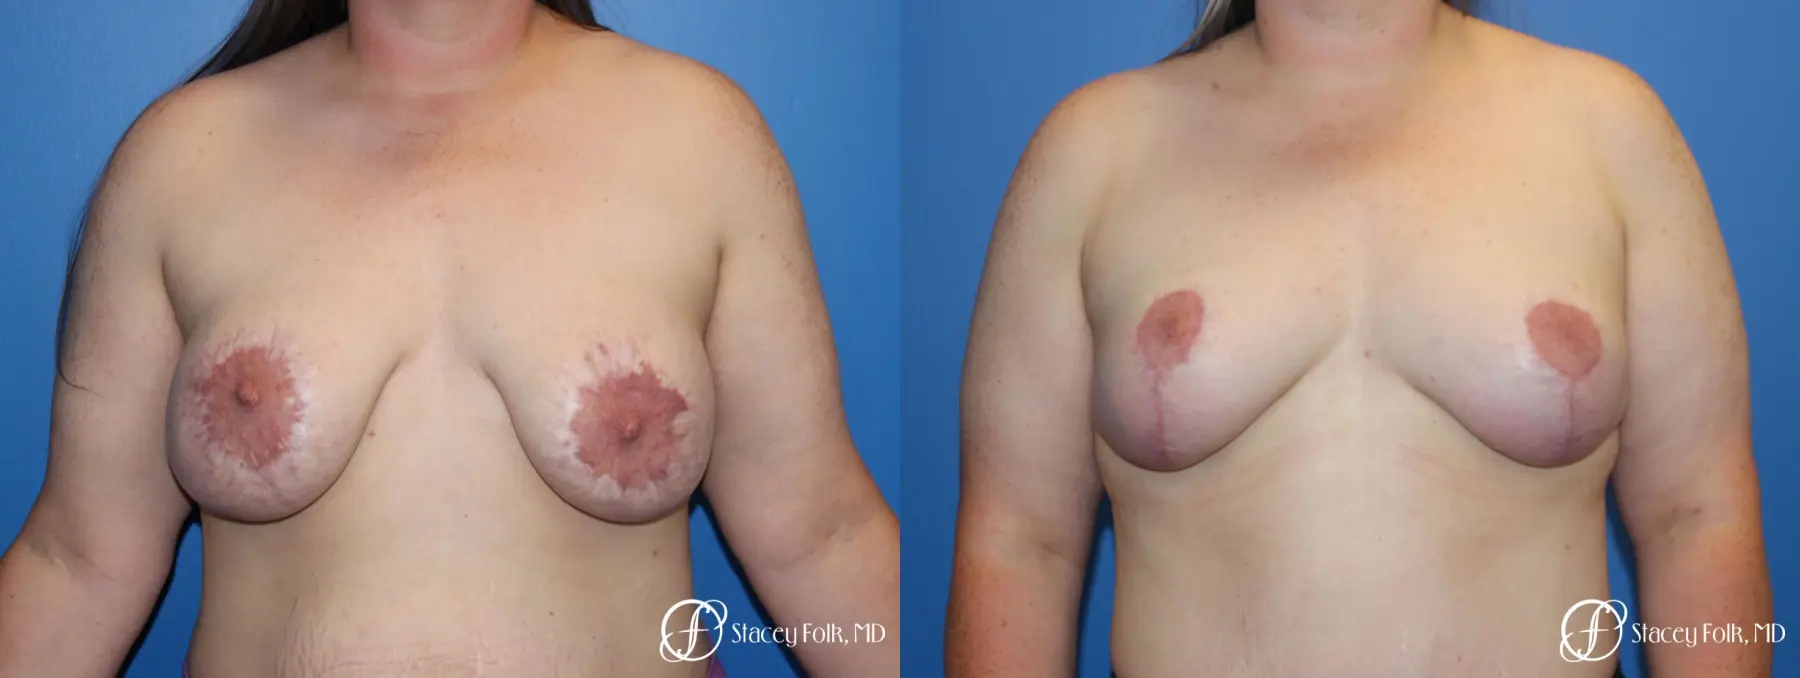 Breast Lift (Mastopexy) - Before and After 1